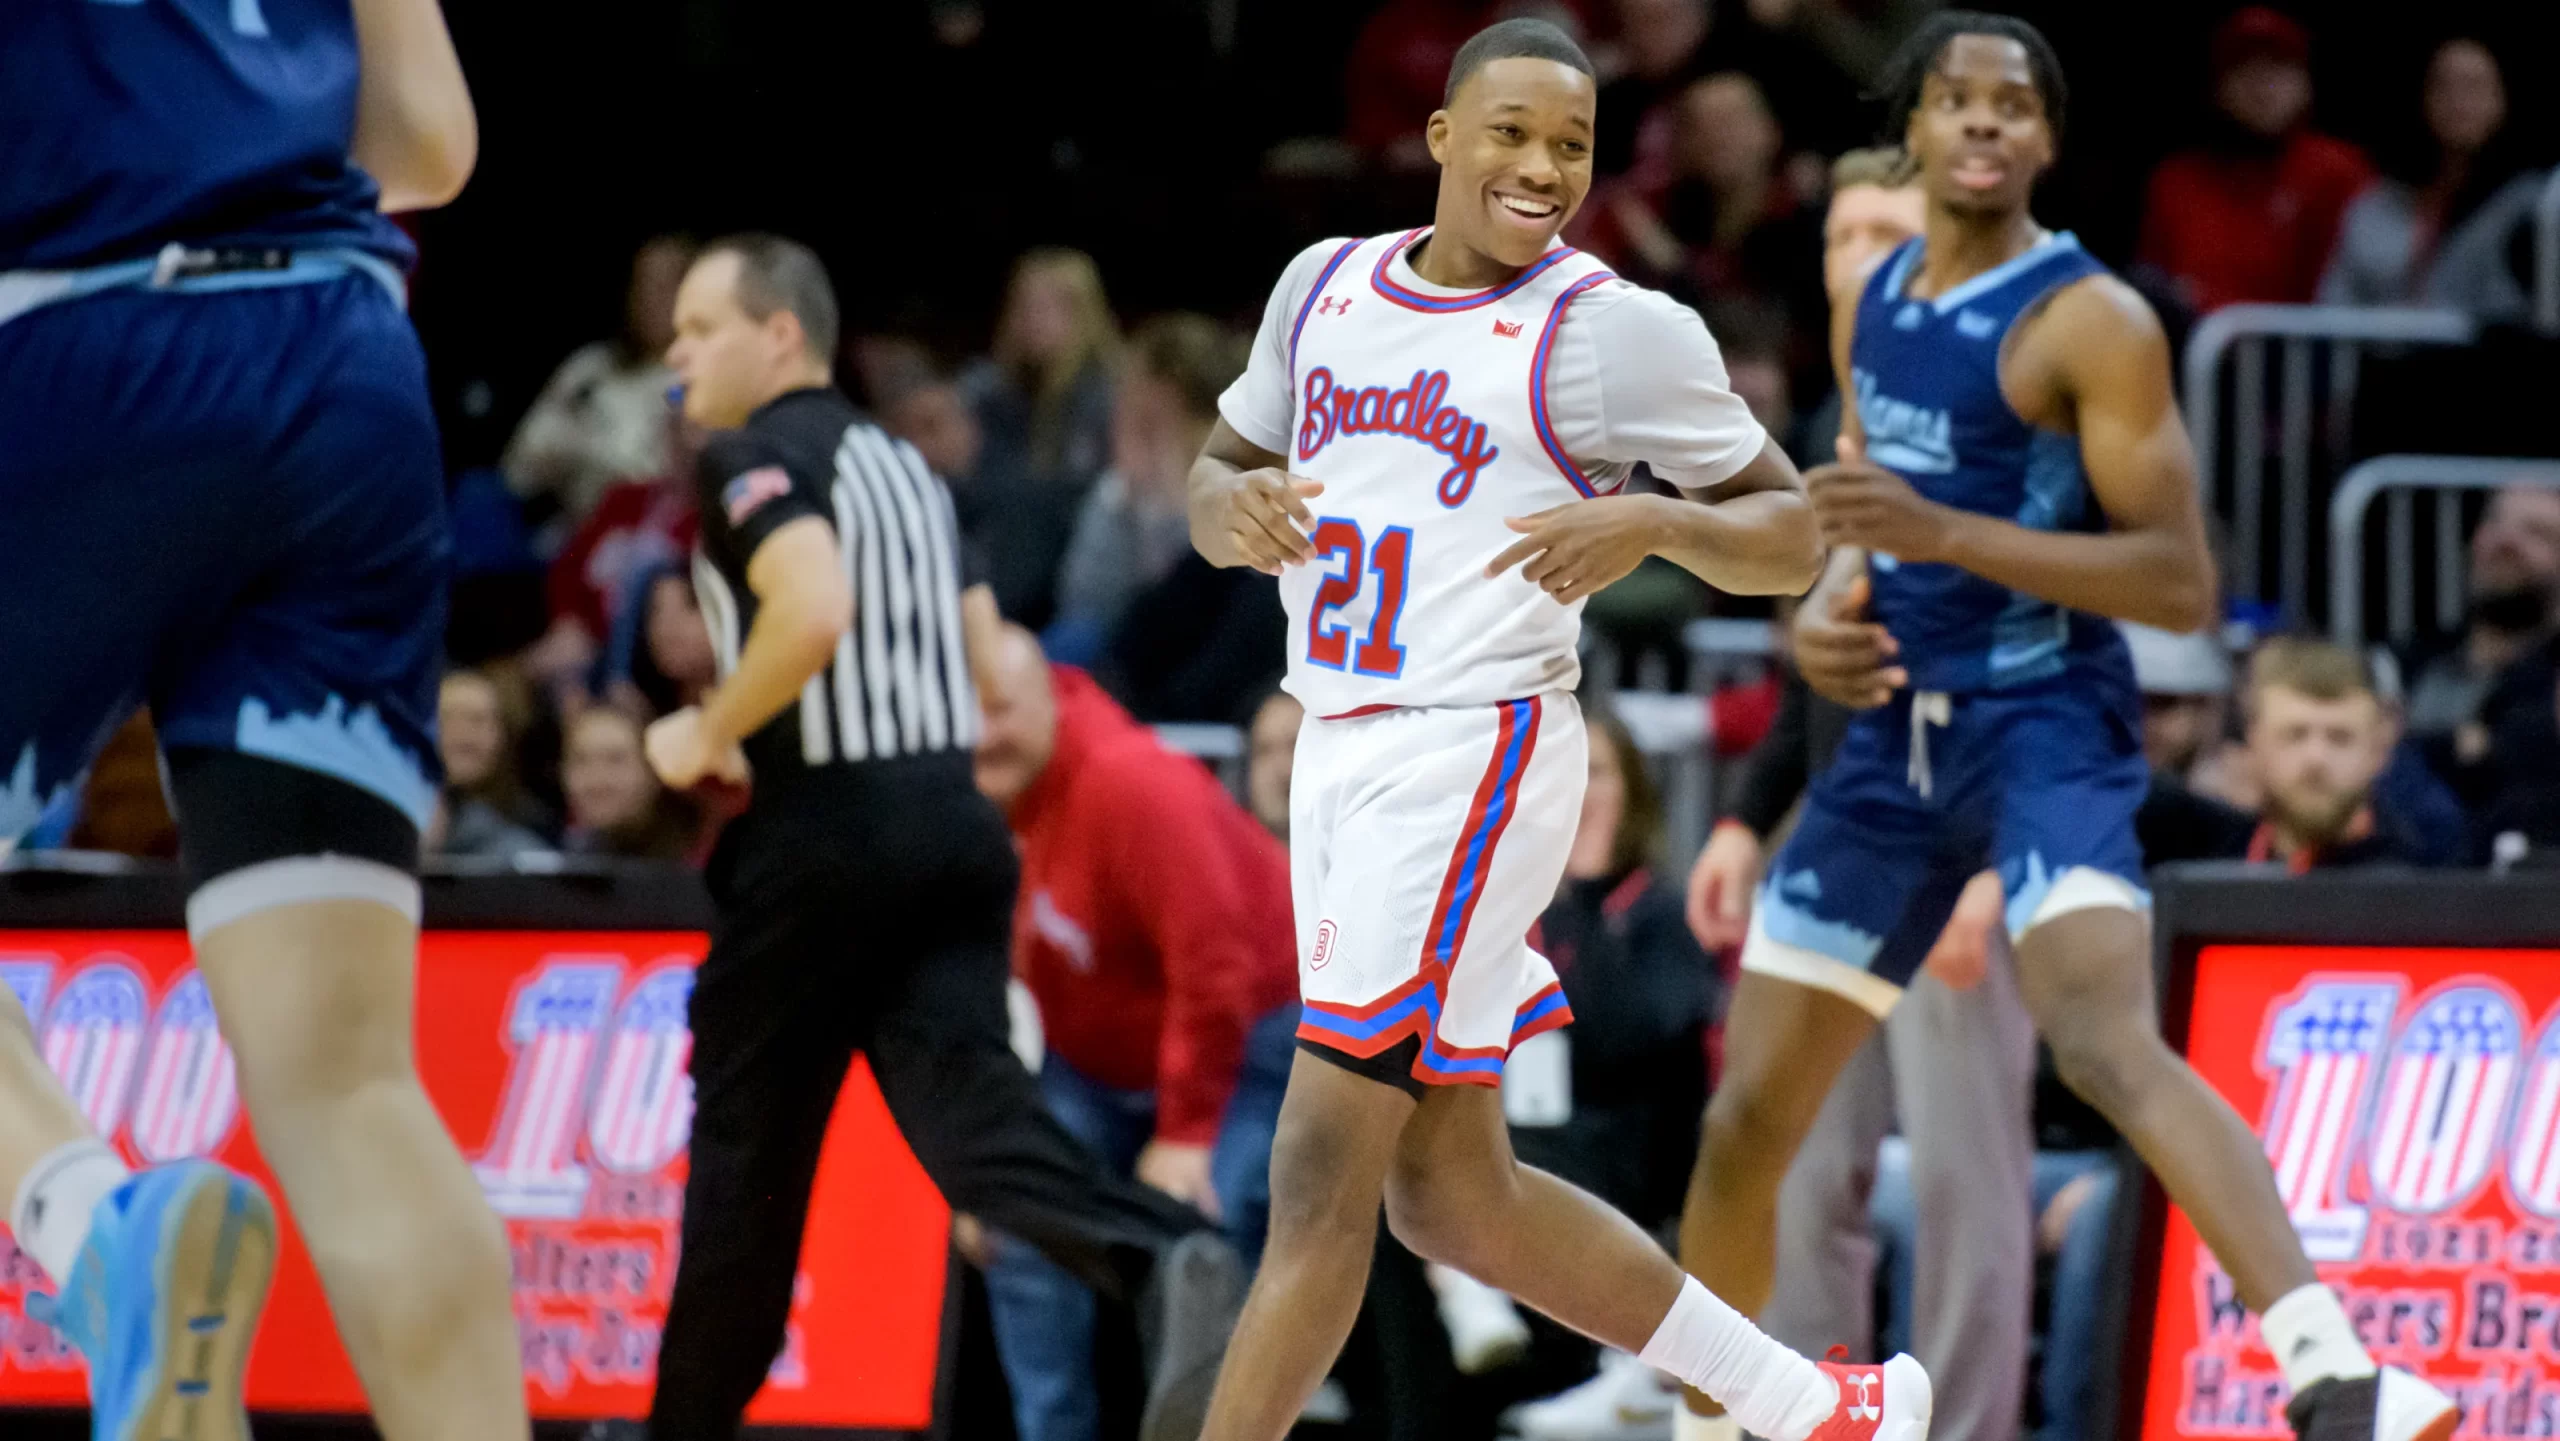 Bradley Braves vs. UIC Flames: Halftime Report and Matchup Preview